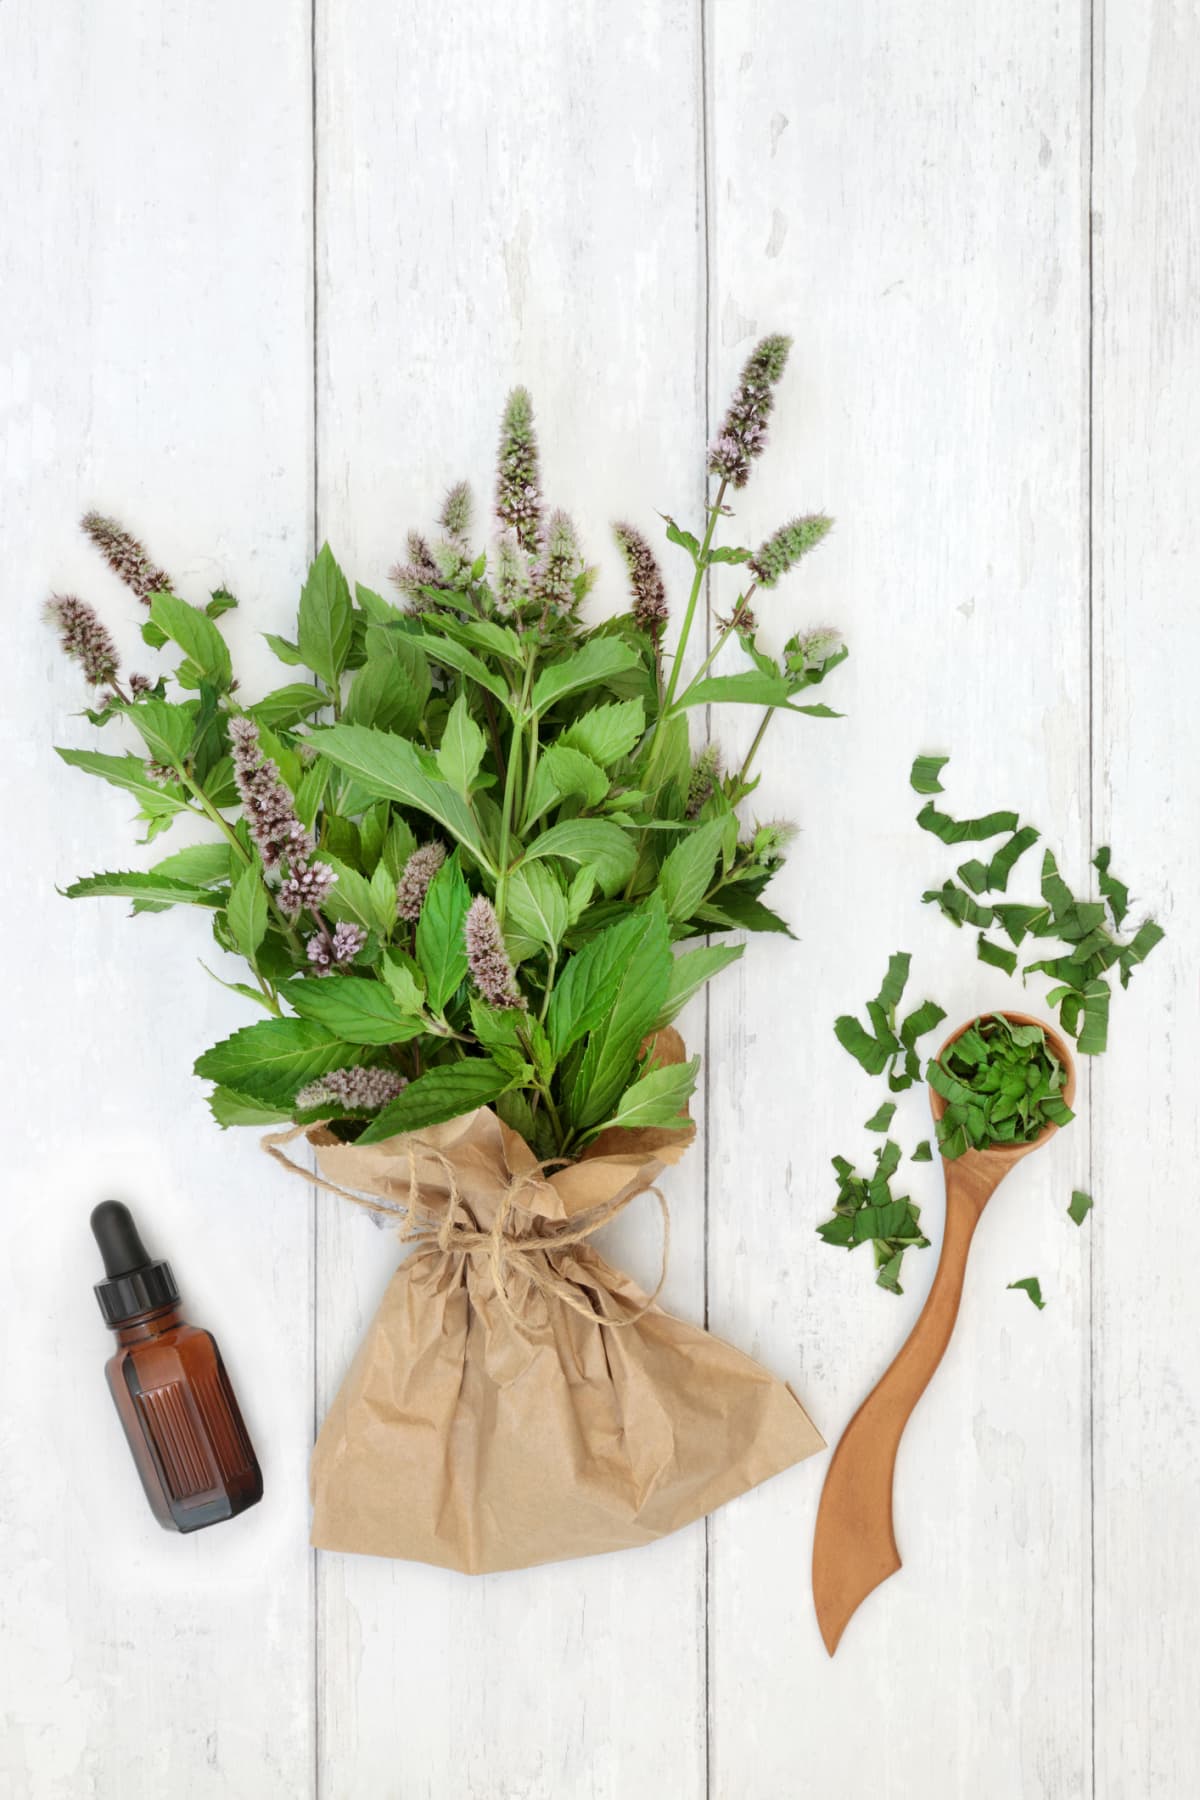 Peppermint herb leaves and essential oil bottle on rustic wood